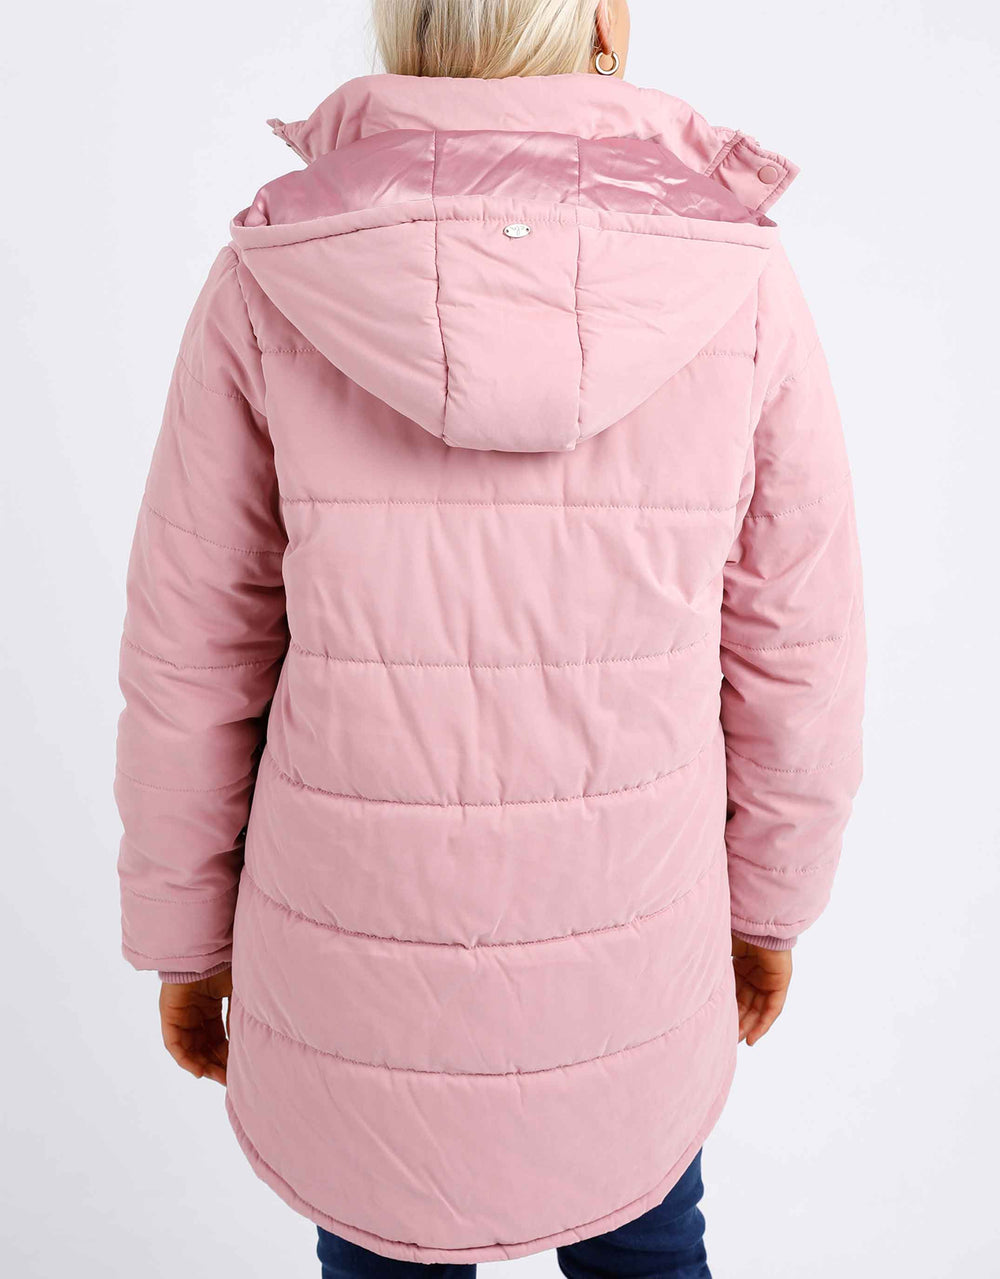 elm-maddie-puffer-jacket-dusty-pink-womens-clothing